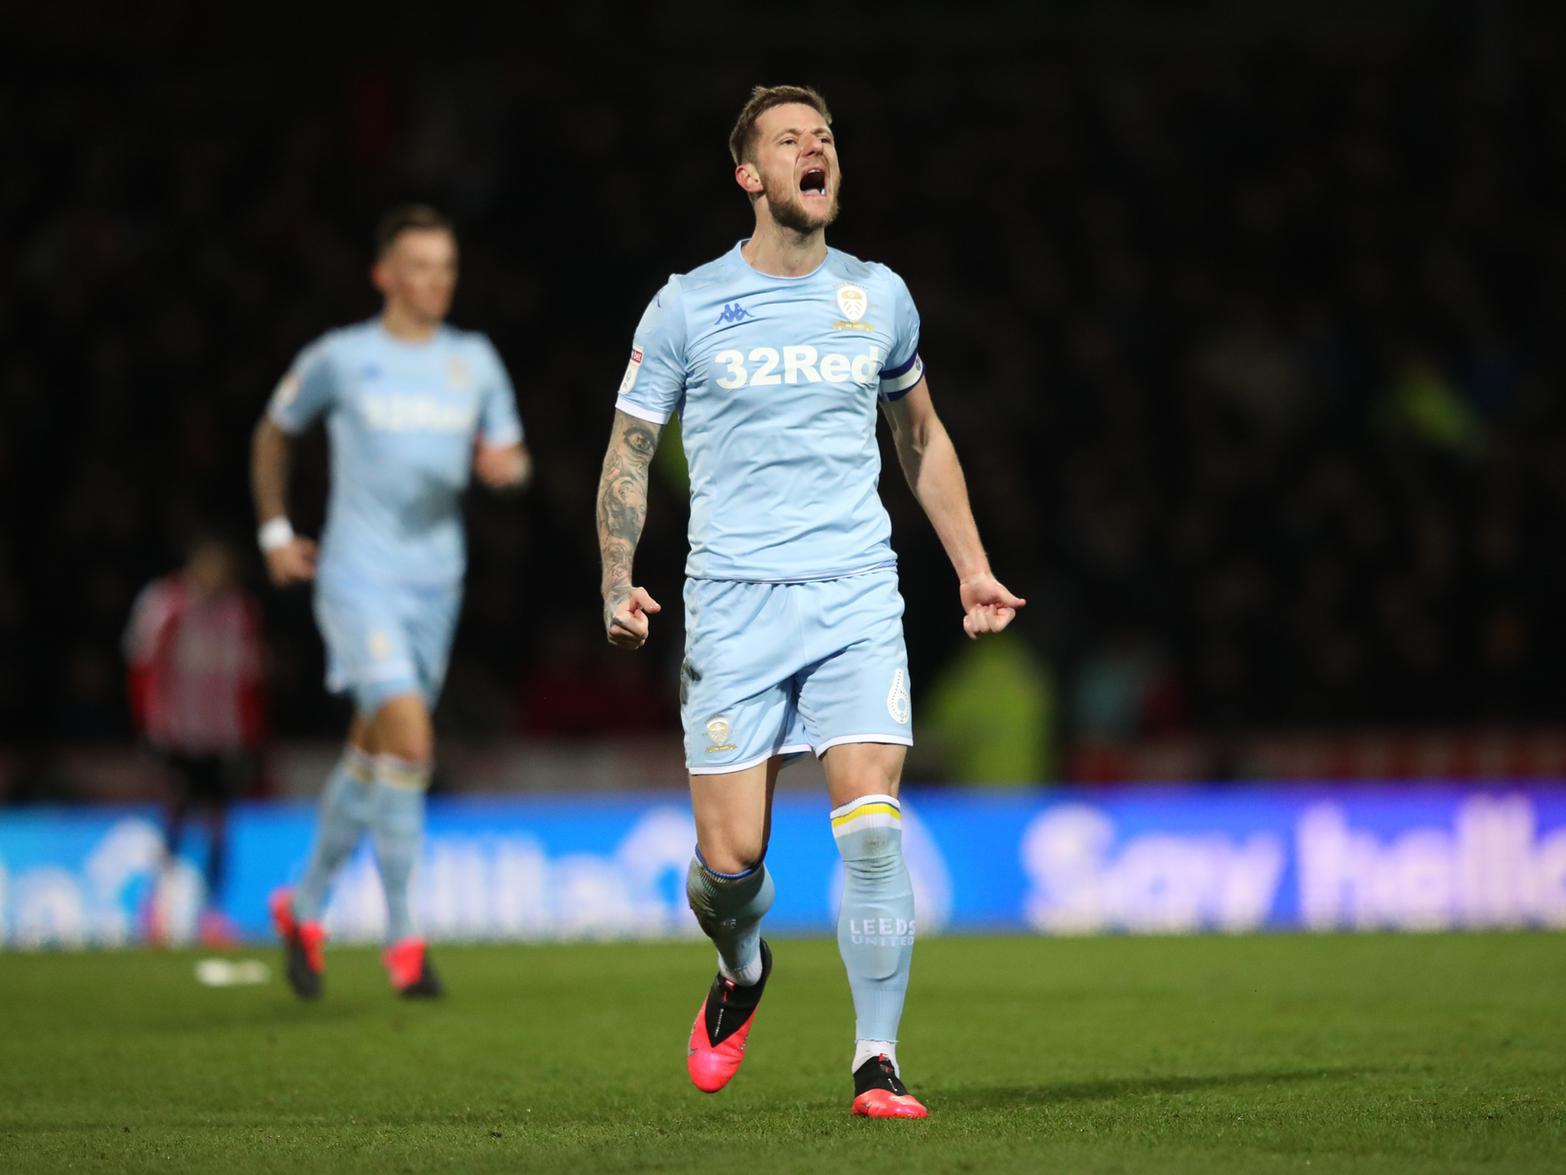 Leeds United made it three wins from three with a 1-0 victory against Middlesbrough. Defender Liam Cooper kept Boro at bay with four tackles, five interceptions, three clearances and a block - not a bad evening's work!